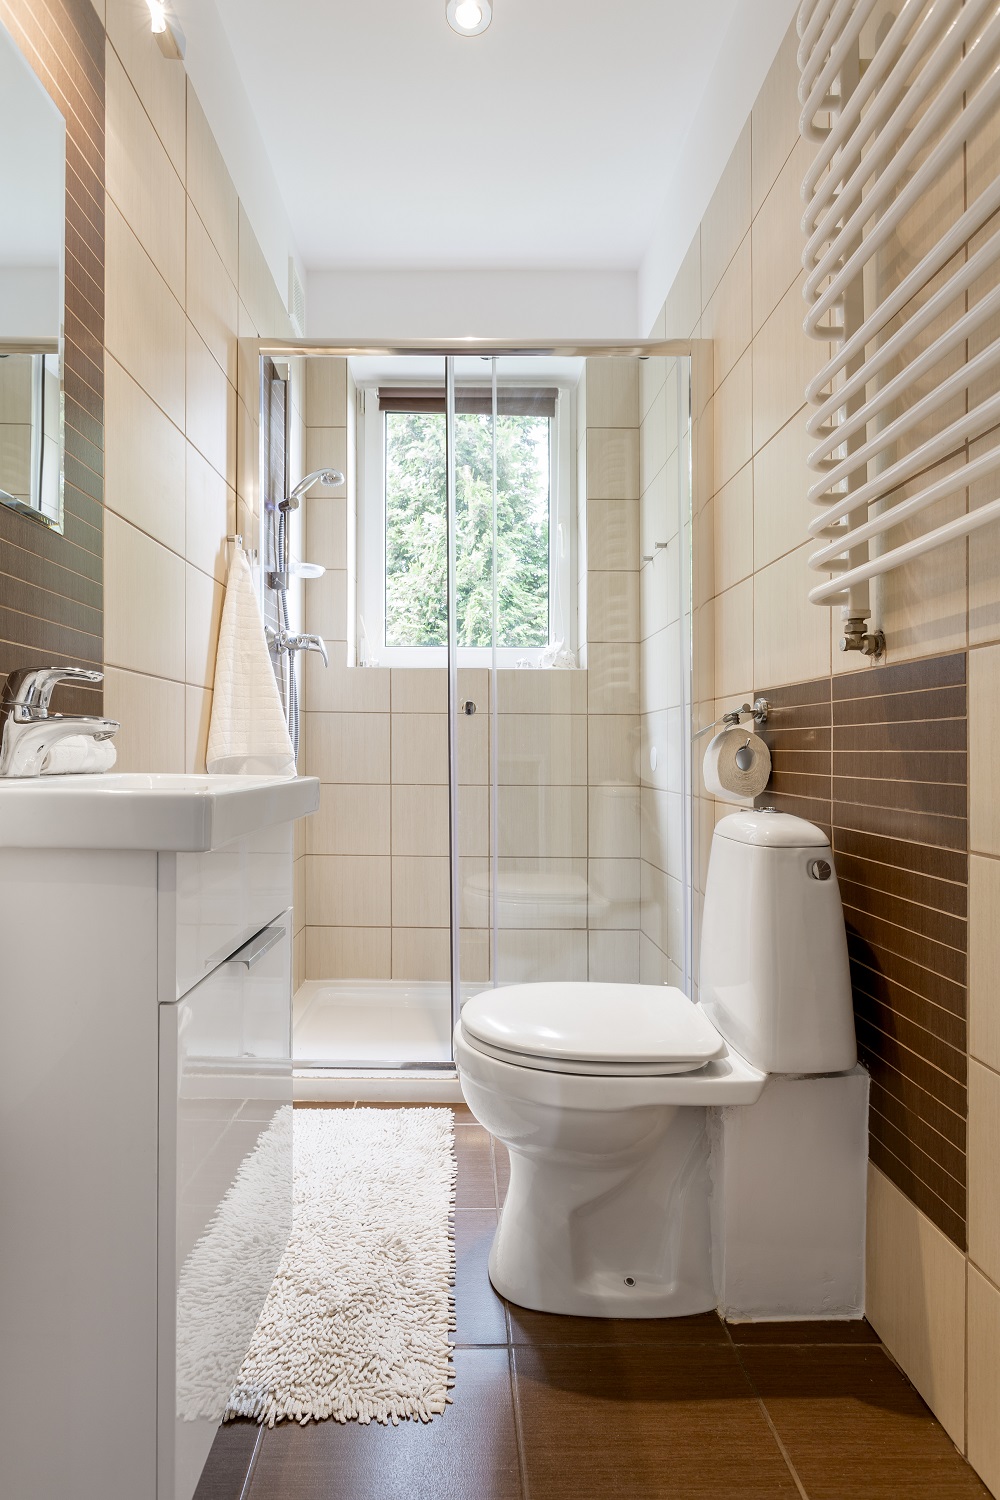 Lifestyle image of a small bathroom with small walk in shower, close coupled toilet and vanity unit with basin